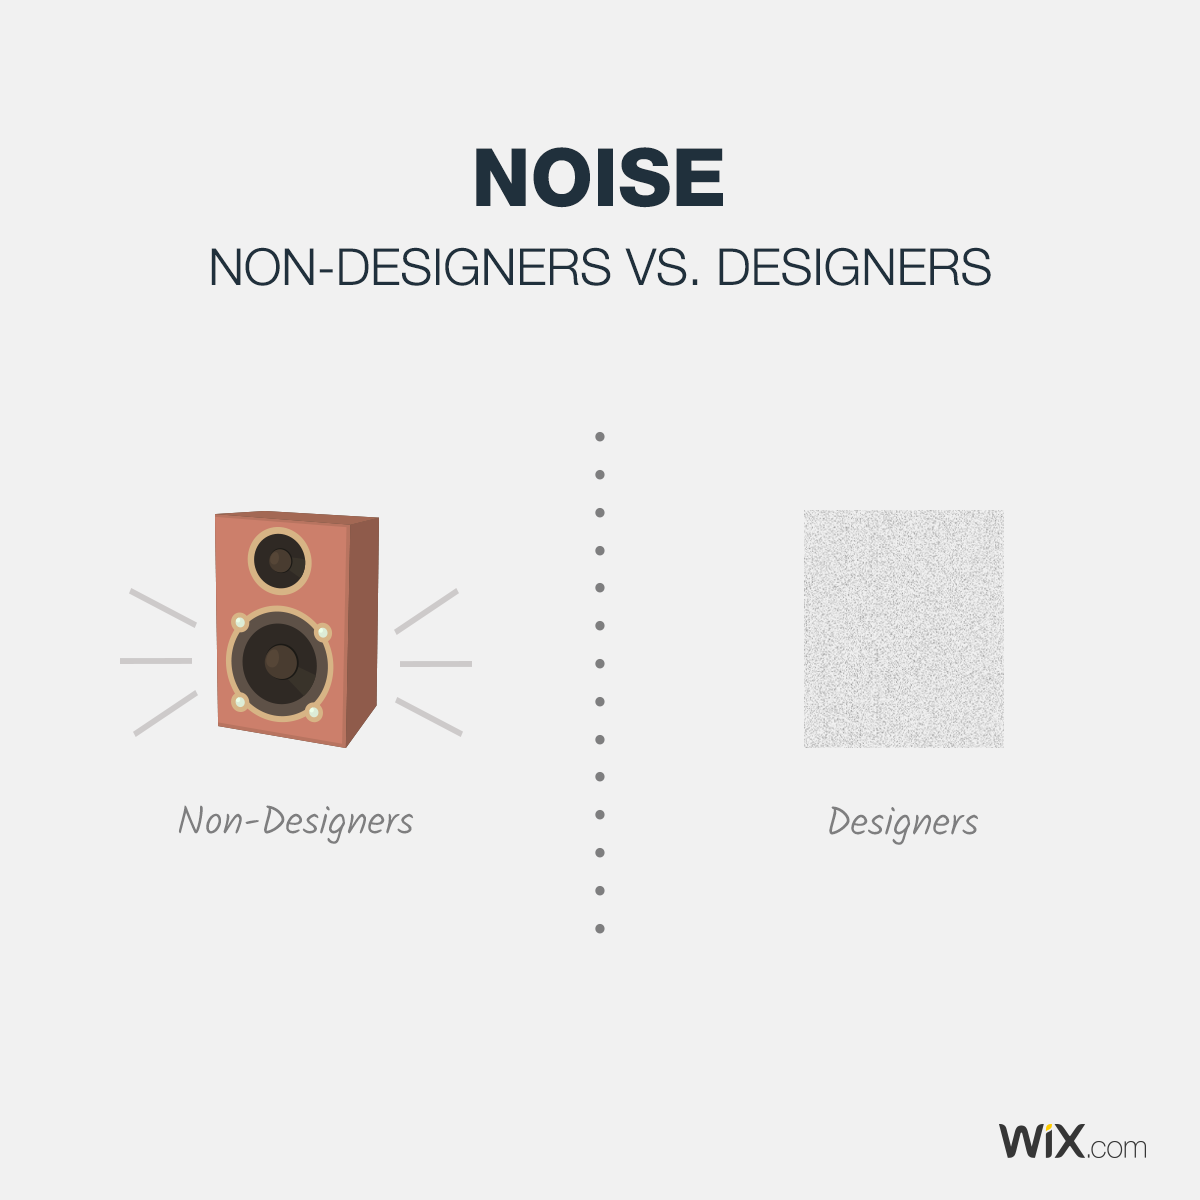 Differences Between Designers and Non-Designers - Noise